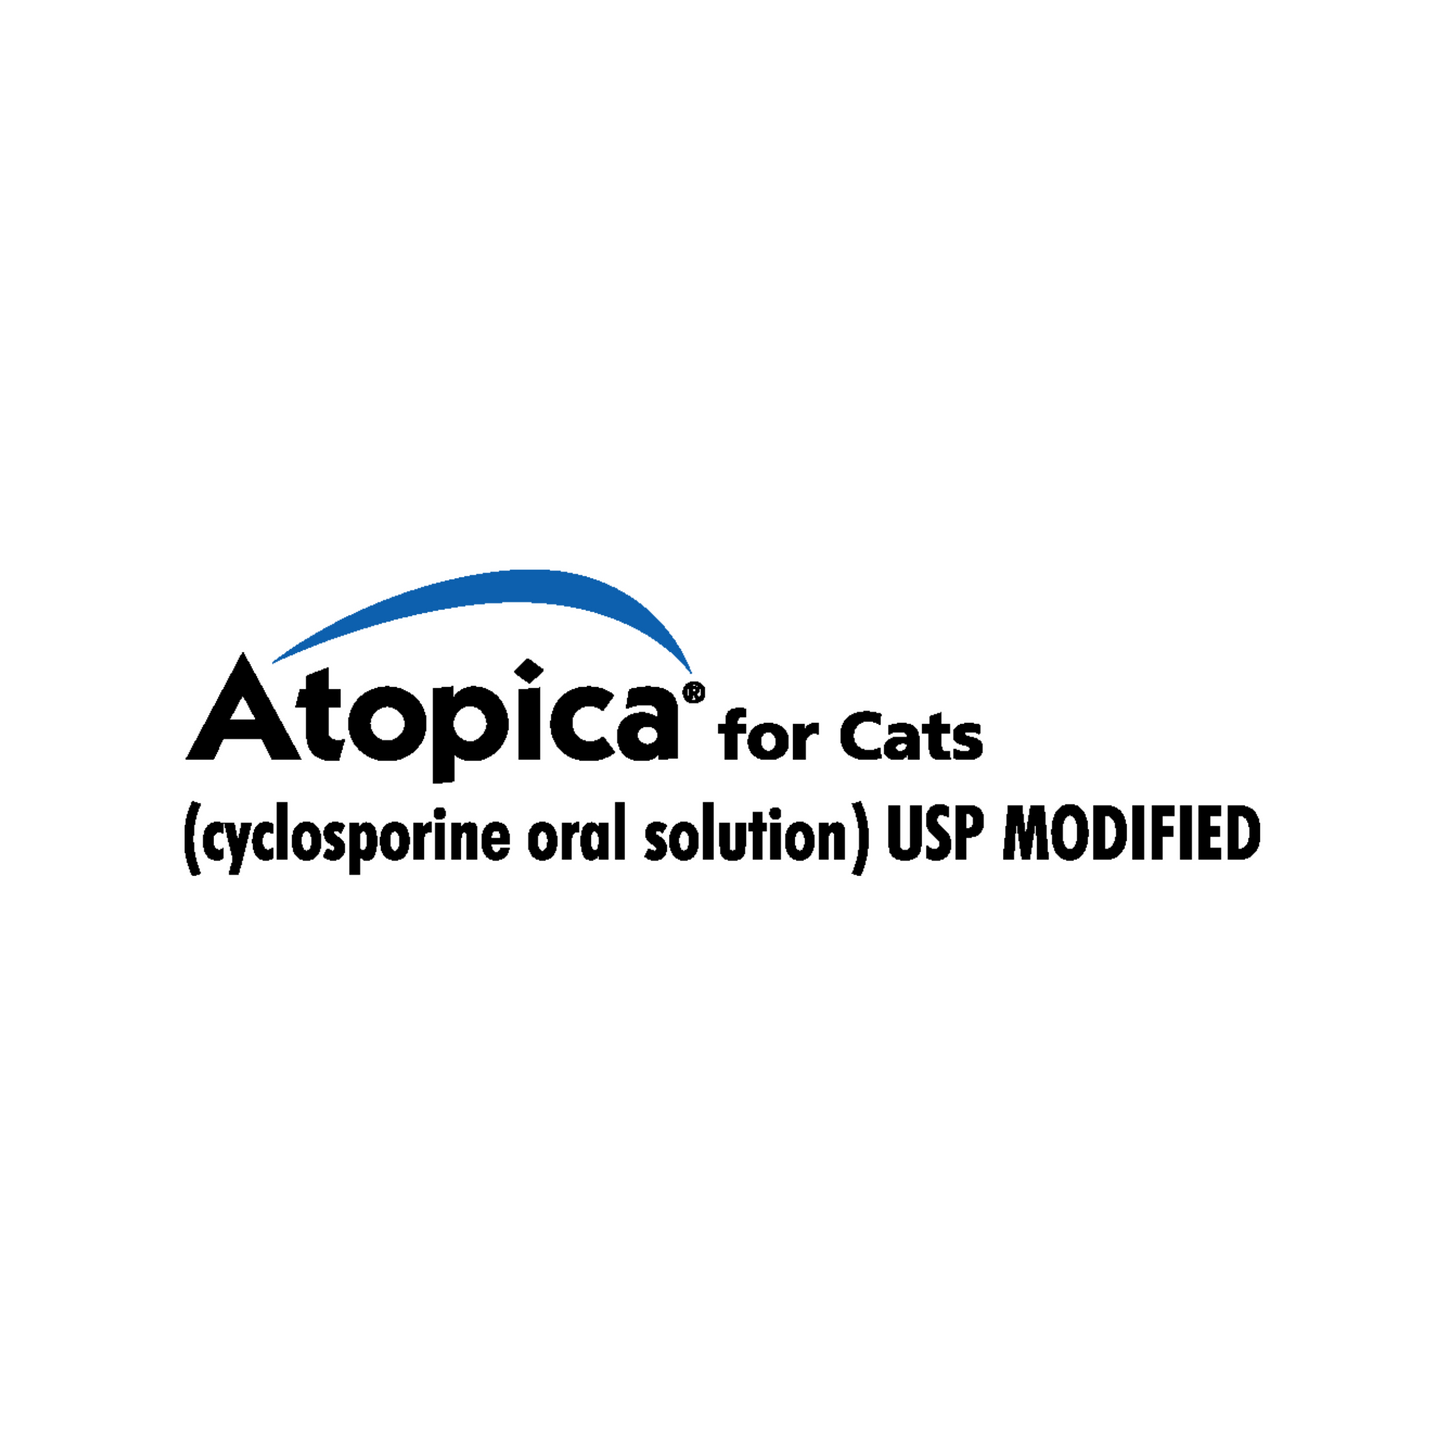 Atopica for Cats